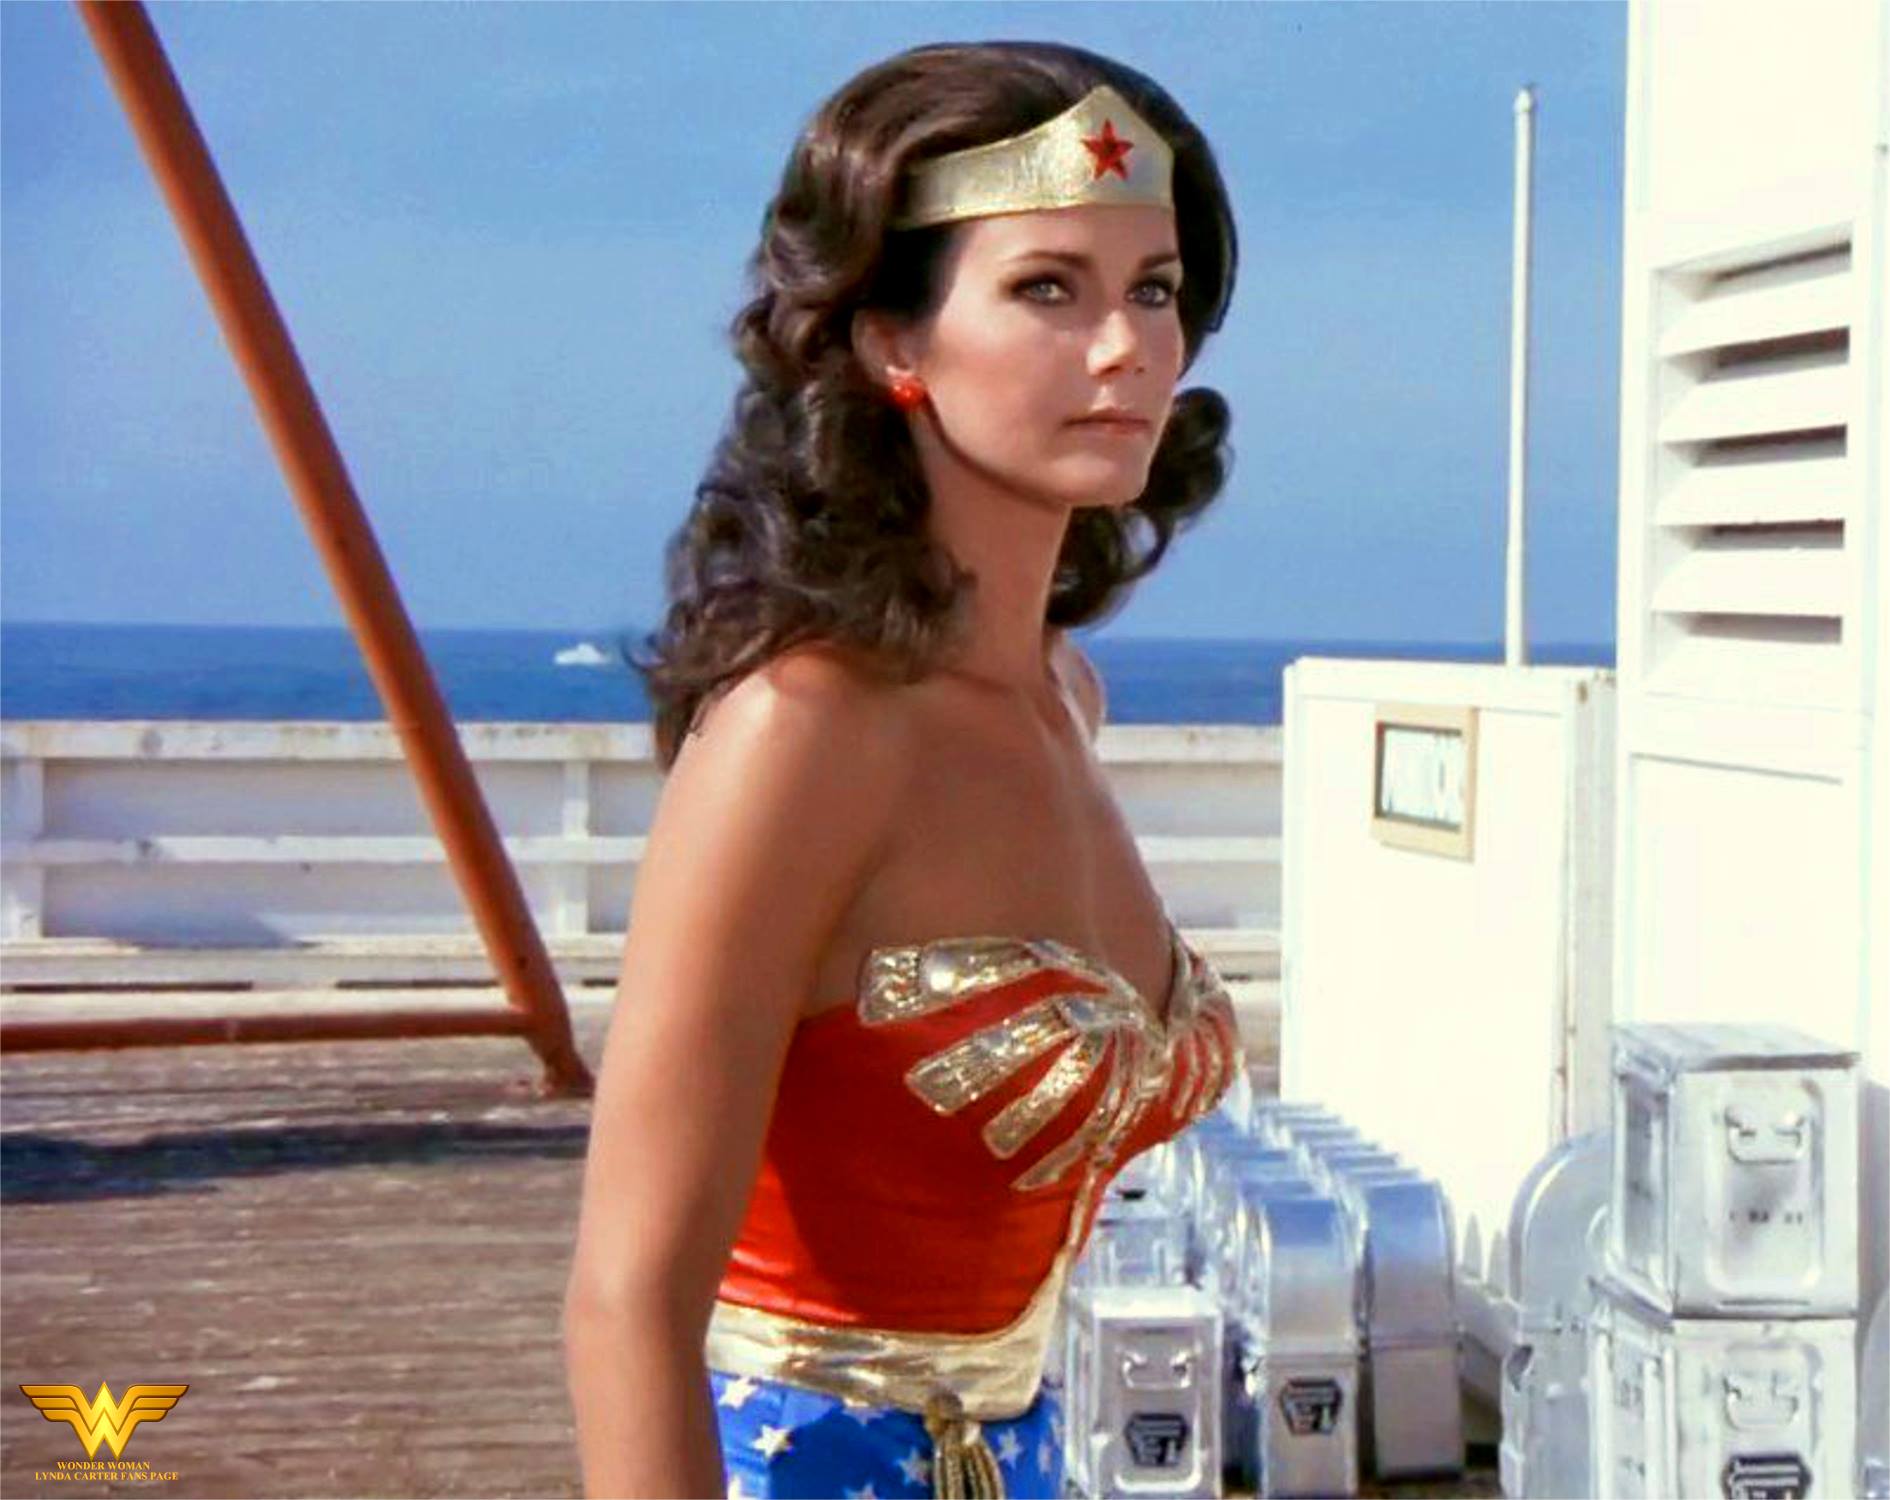 "Wonder Woman" was one of the many TV series that used the Bermuda Triangle as a plot device.